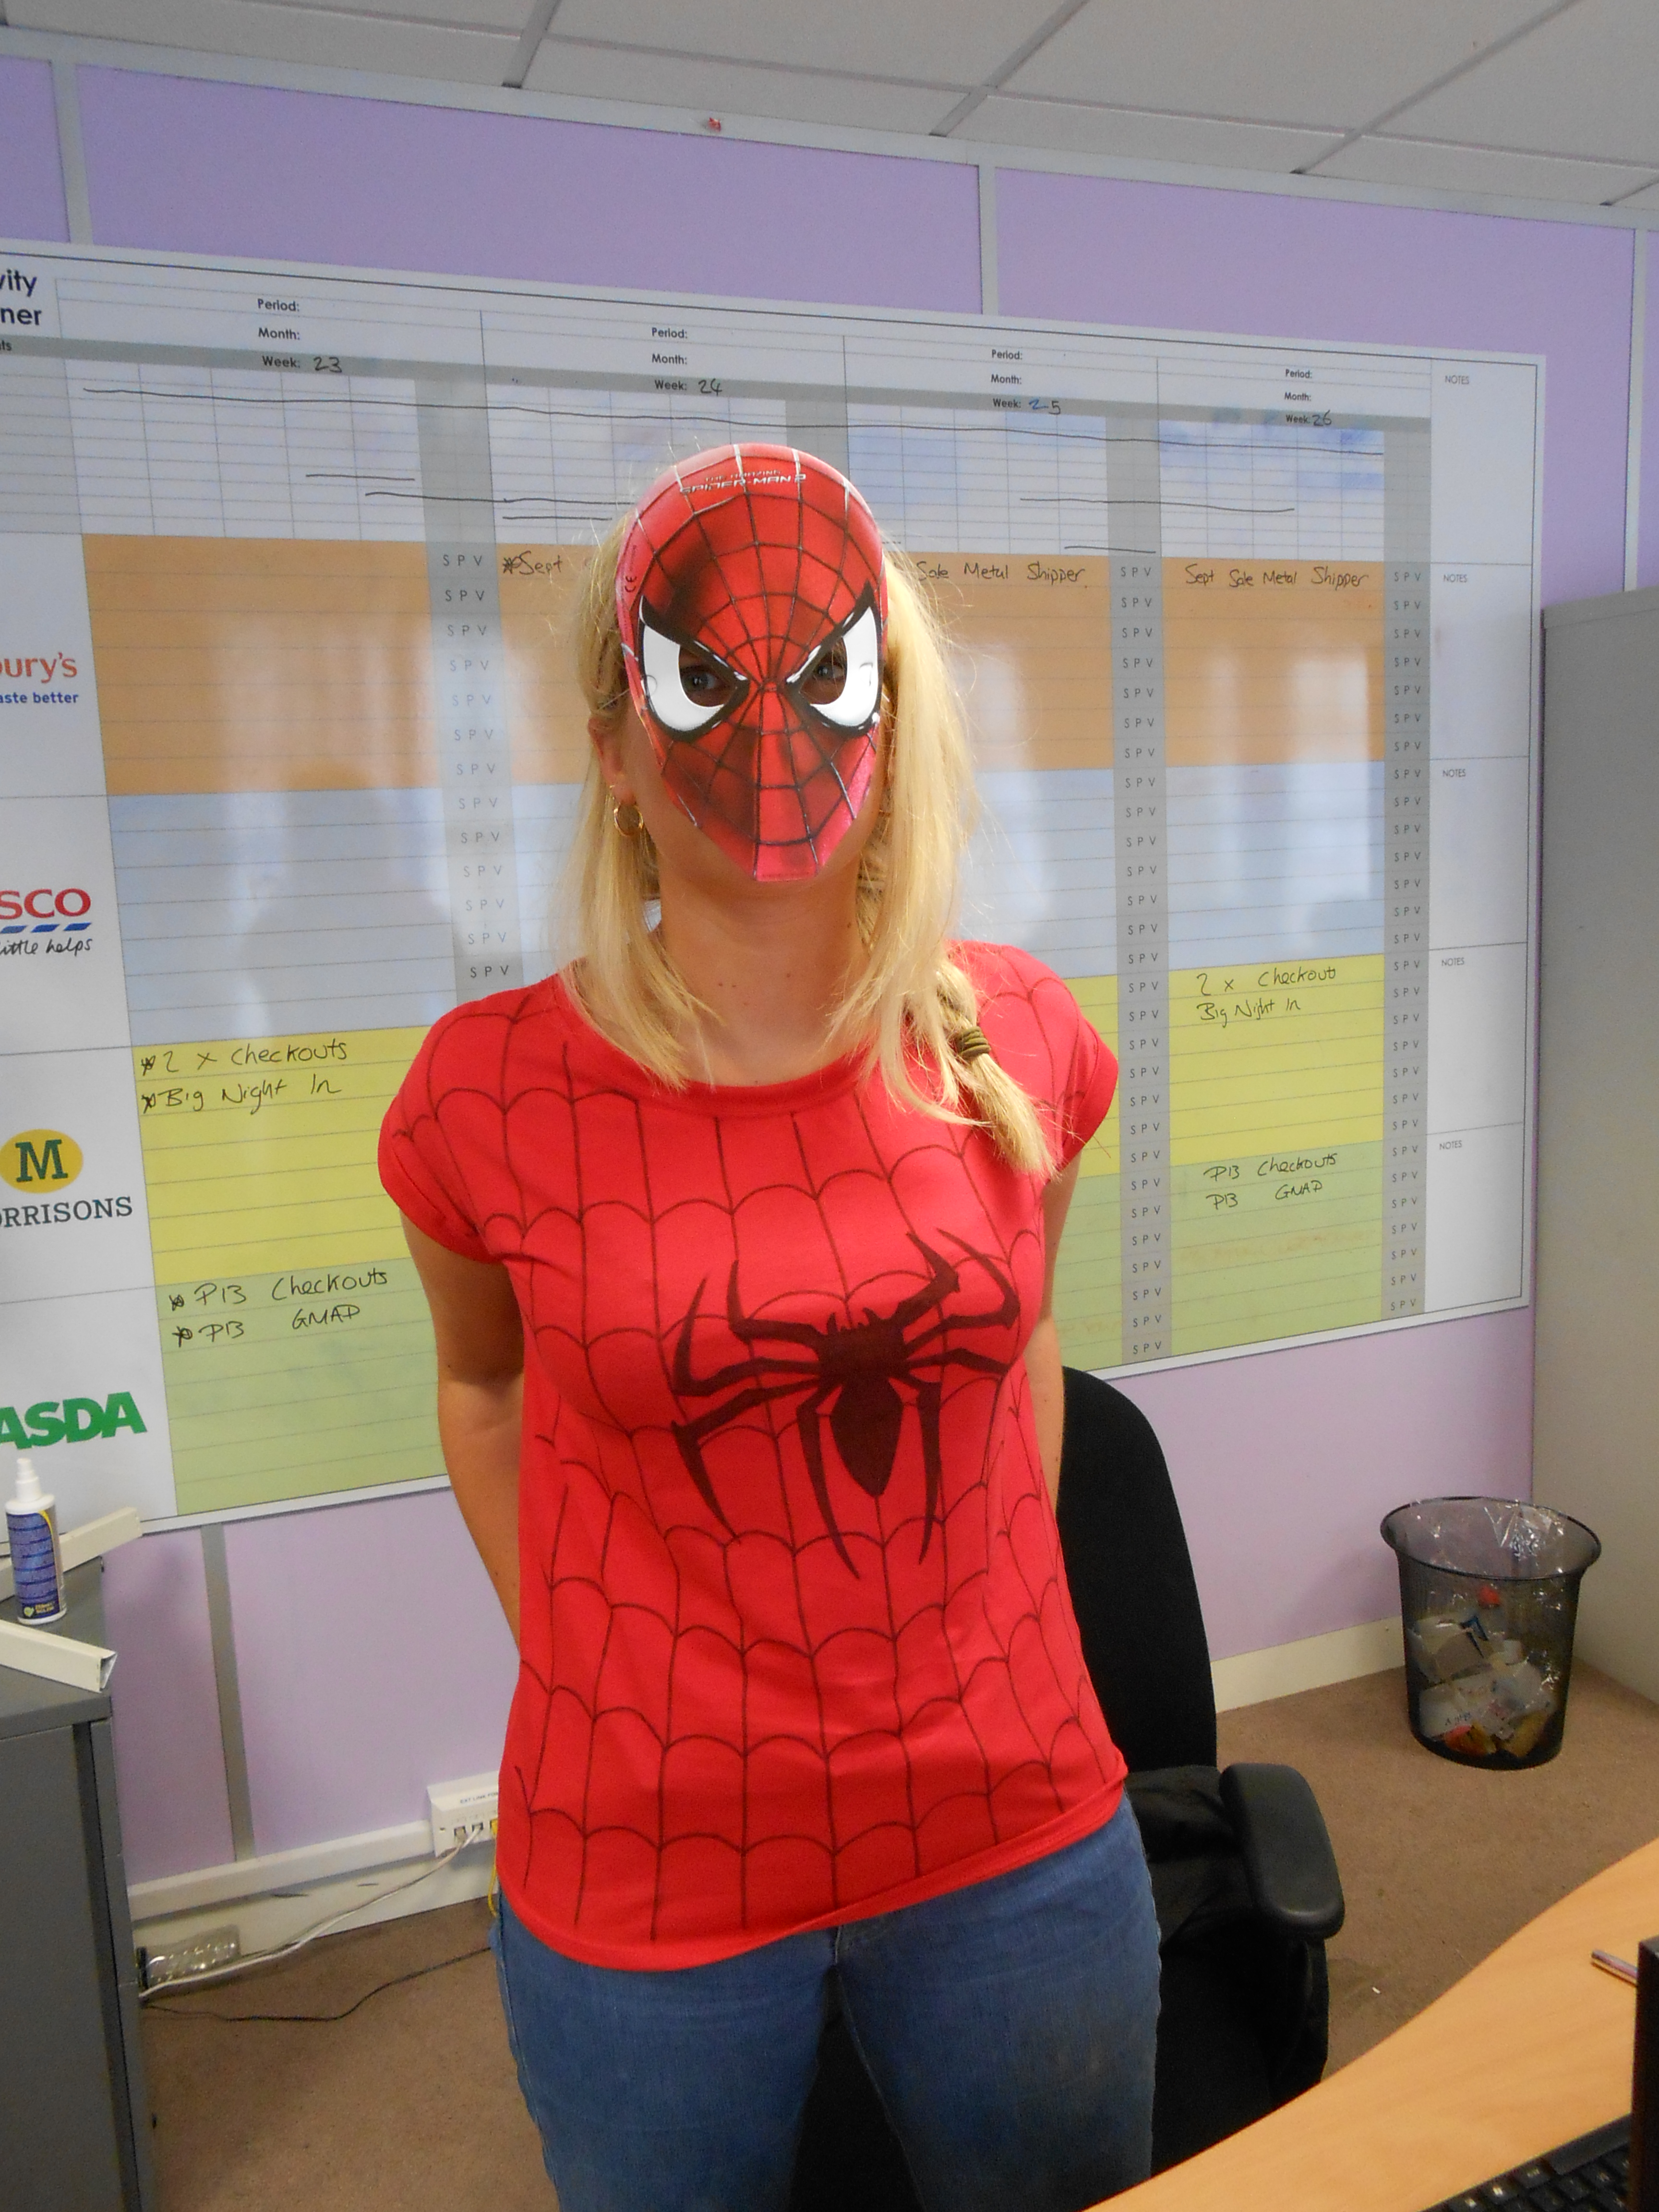 Harriet Thomas as Spiderman-What life is really like working at eXPD8